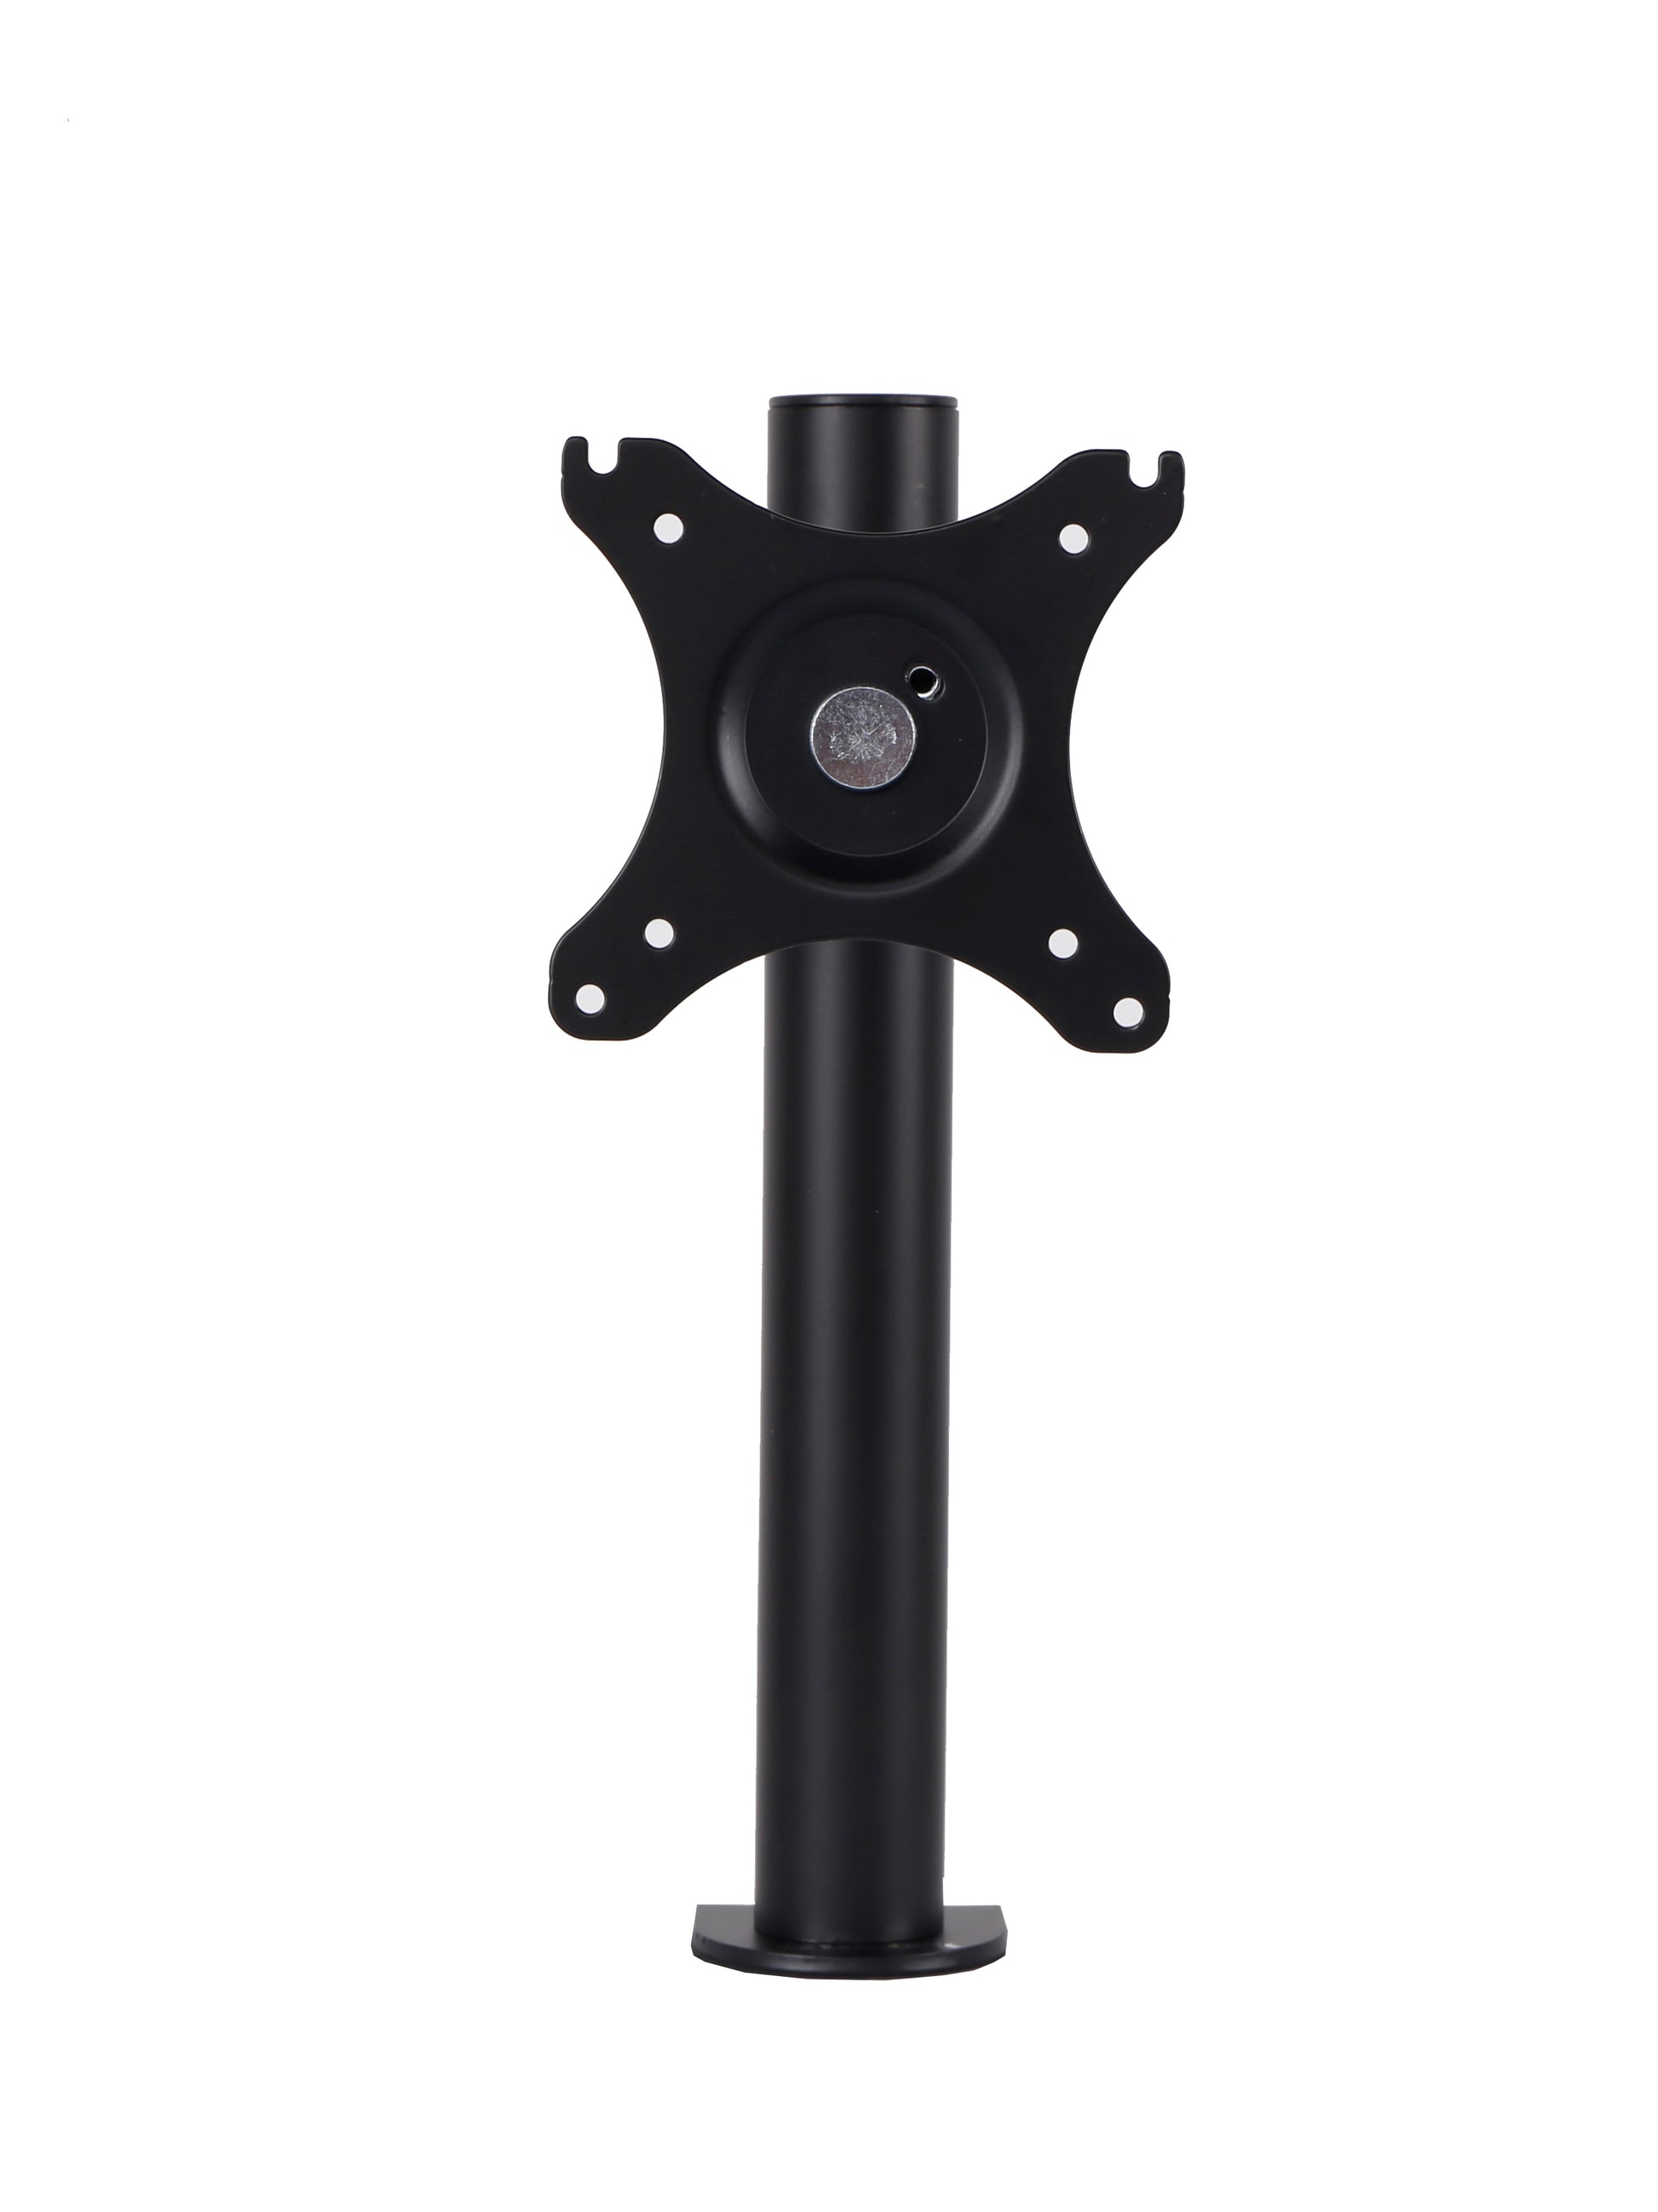 Buy Rapidline Revolve Single Monitor Arm FREE SHIPPING RMA1 BL Perfect to use with our range of Standing Desks and Desk Converters! Liberate your worktop space and improve posture with a Revolve pole mounted single monitor arm. With 360 degrees horizontal adjustment and cable management within the pole. Colour: Black